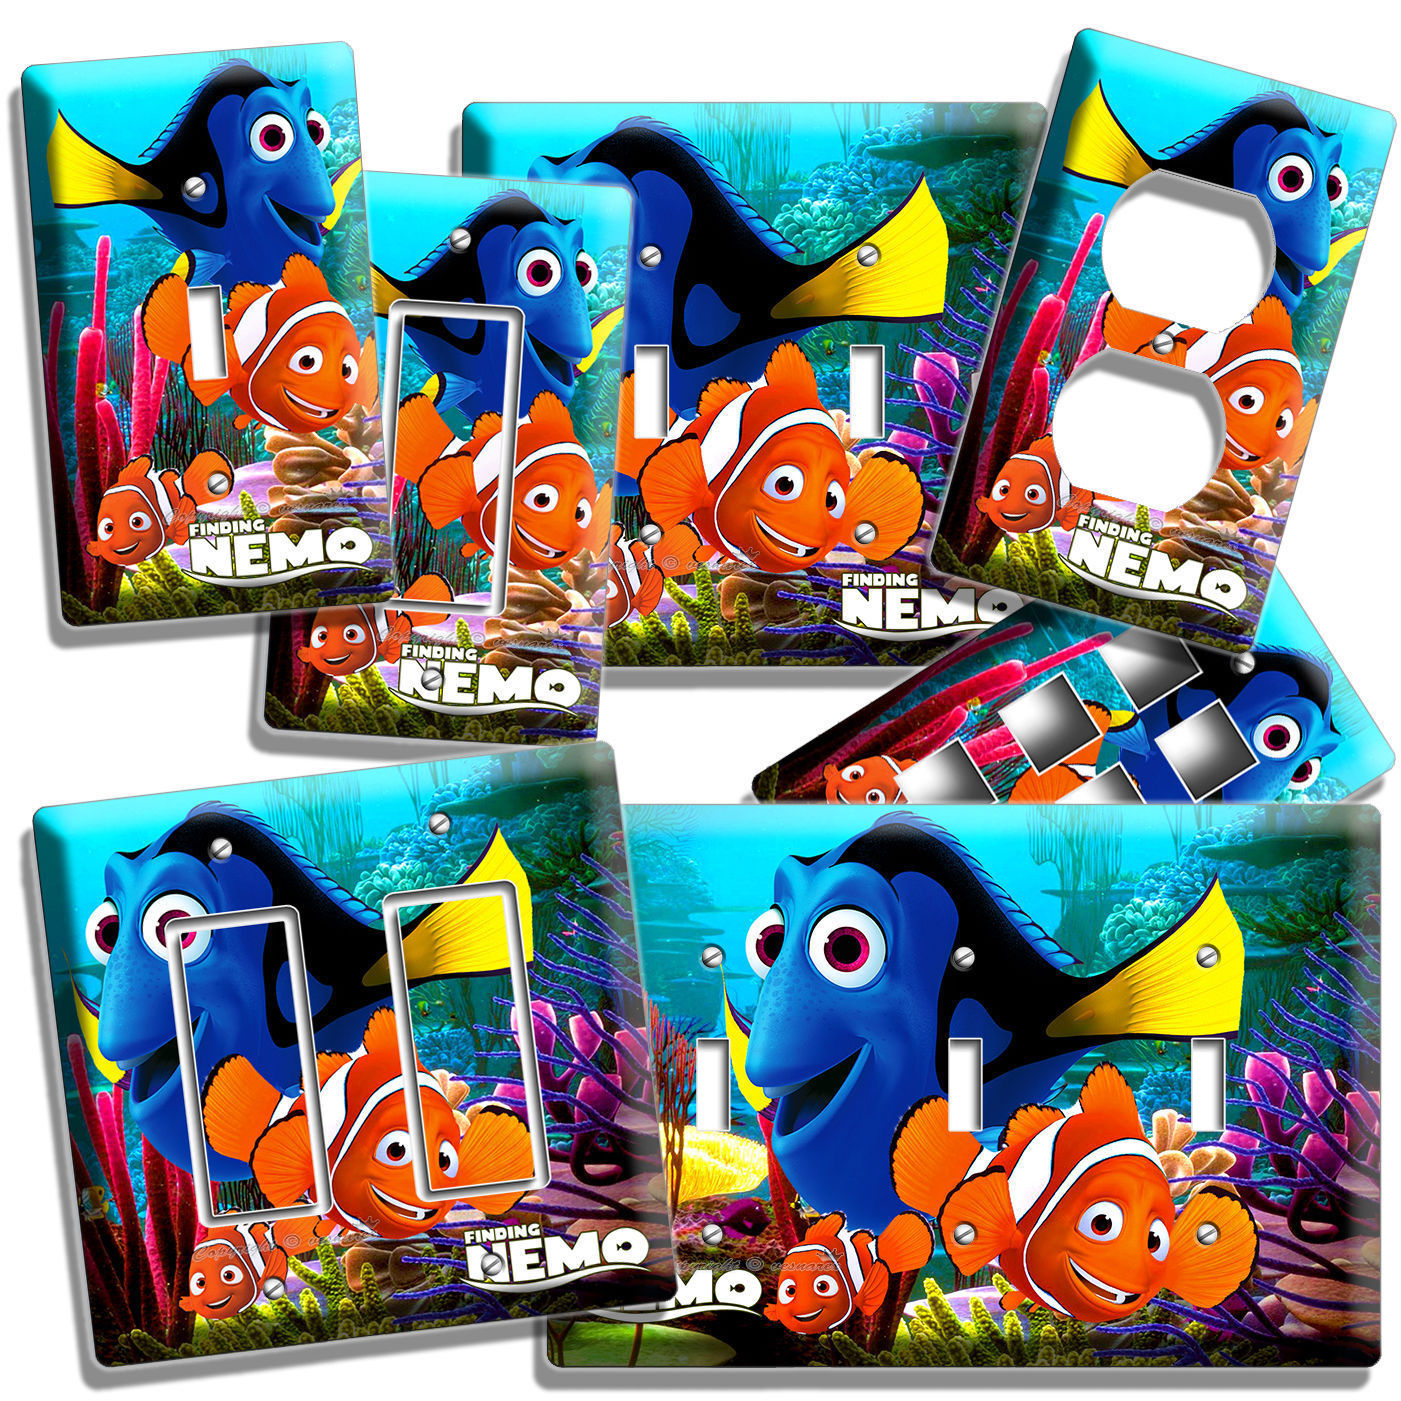 FINDING NEMO DORY MARLIN OCEAN LIGHT SWITCH WALL PLATE OUTLET KIDS BEDROOM DECOR - £9.63 GBP - £24.08 GBP